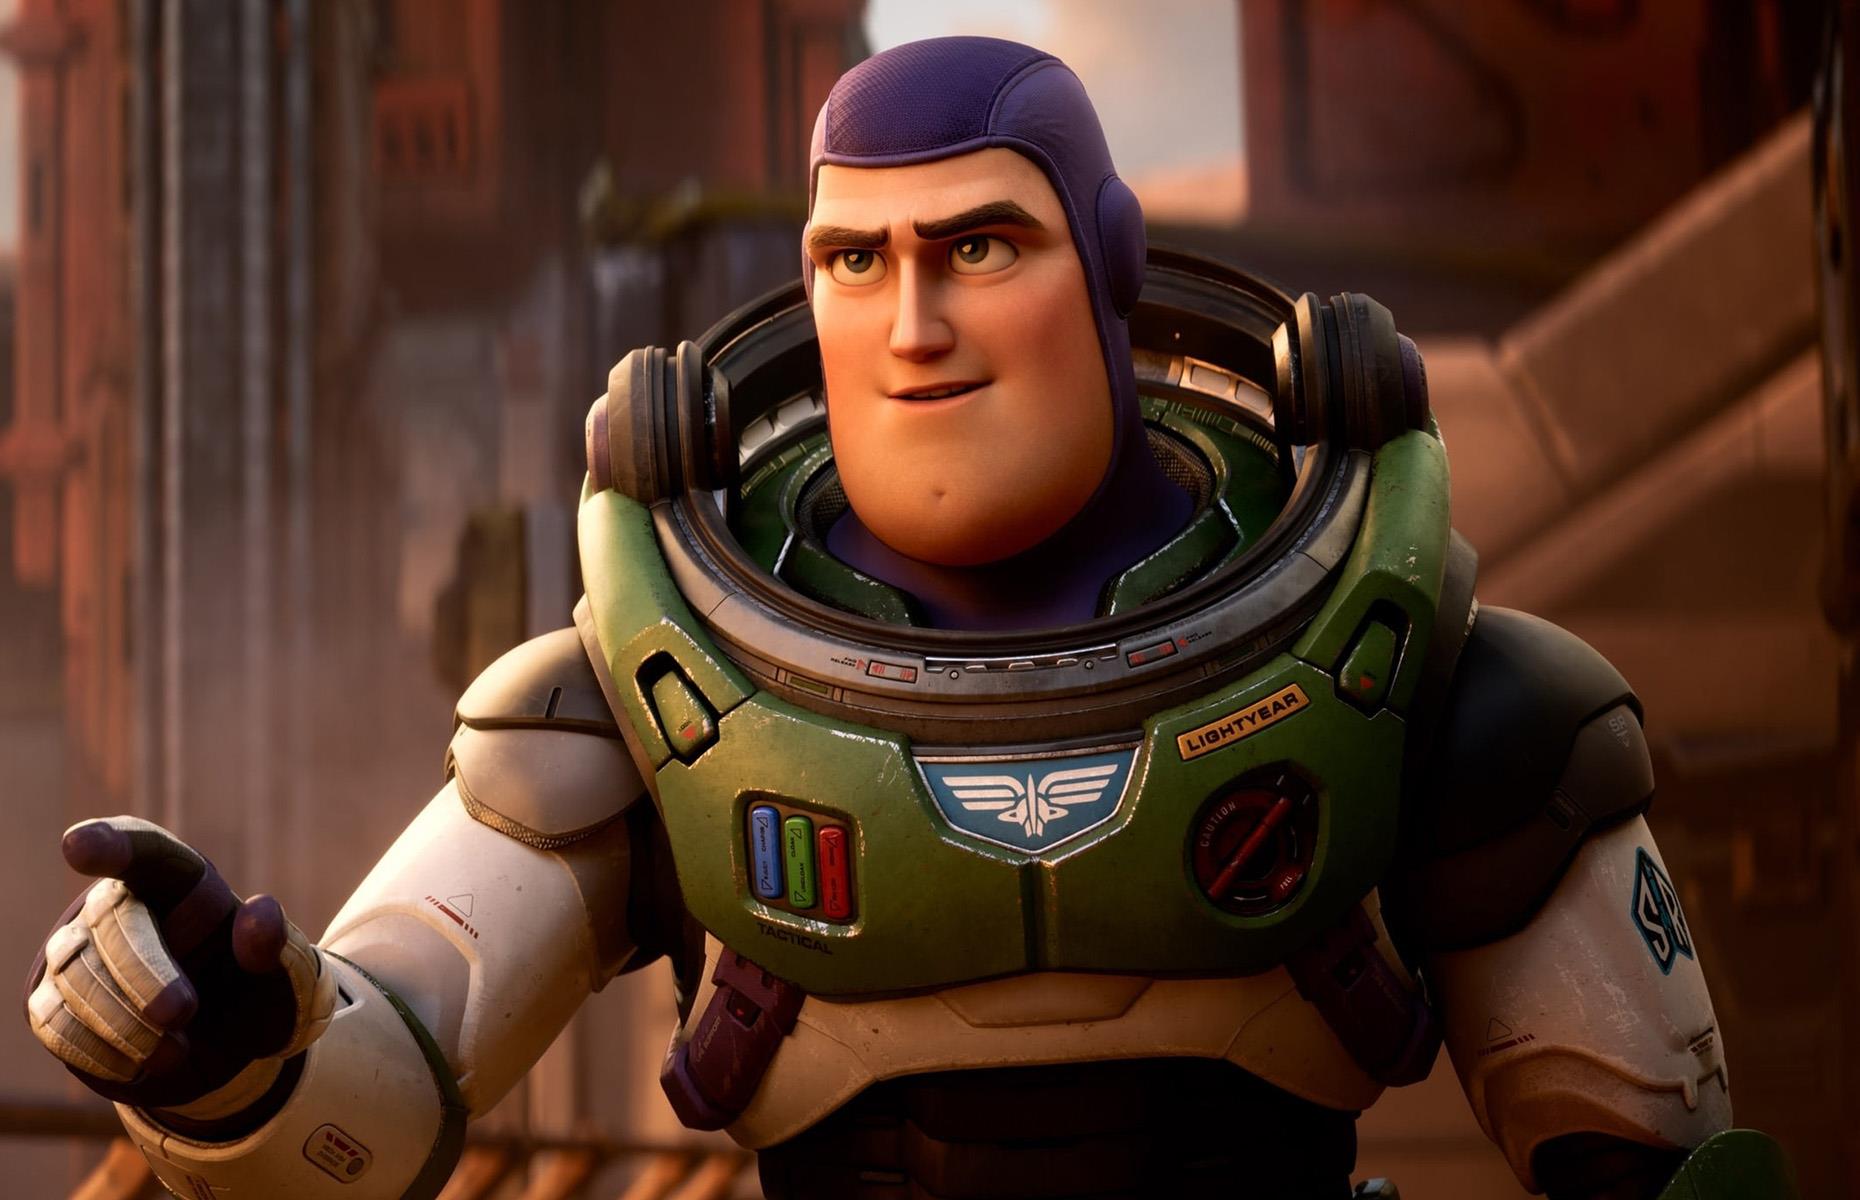 <p>The beloved <em>Toy Story</em> franchise has been a major success for the Mouse House, so the studio naturally anticipated the 2022 spin-off <em>Lightyear</em> would achieve similar box office stardom. The project was allocated a budget of $200 million.</p>  <p>But despite its hefty production spend and generally positive reviews, the film underperformed at the box office, grossing just $226 million globally.</p>  <p>Sources estimate additional costs resulted in the film incurring losses of somewhere between $106 million and $122 million. The unfortunate flick was another victim of the pandemic, while some moviegoers also chose to skip it due to the controversial replacement of Tim Allen with Chris Evans as the voice of Buzz Lightyear. </p>